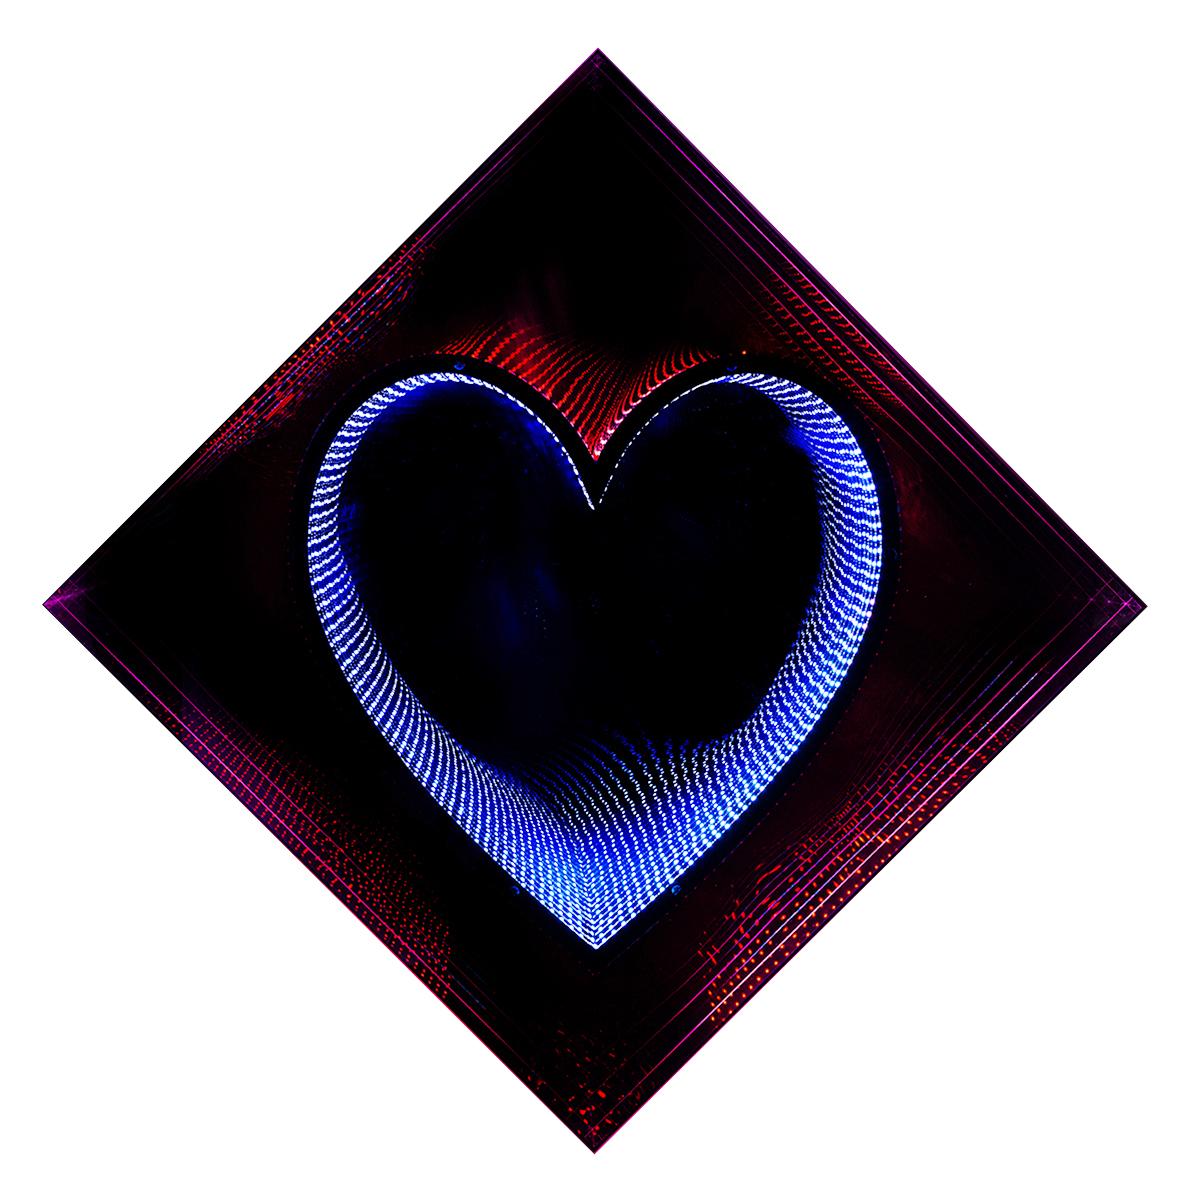 Mirror wall decoration heart light made with led lights
with mirrored glass and plexiglass creating an infiny mirrored
effect through a heart shape. With colors changing option with
remote control. Exceptional piece made in 2020 by Raphael Fenice.